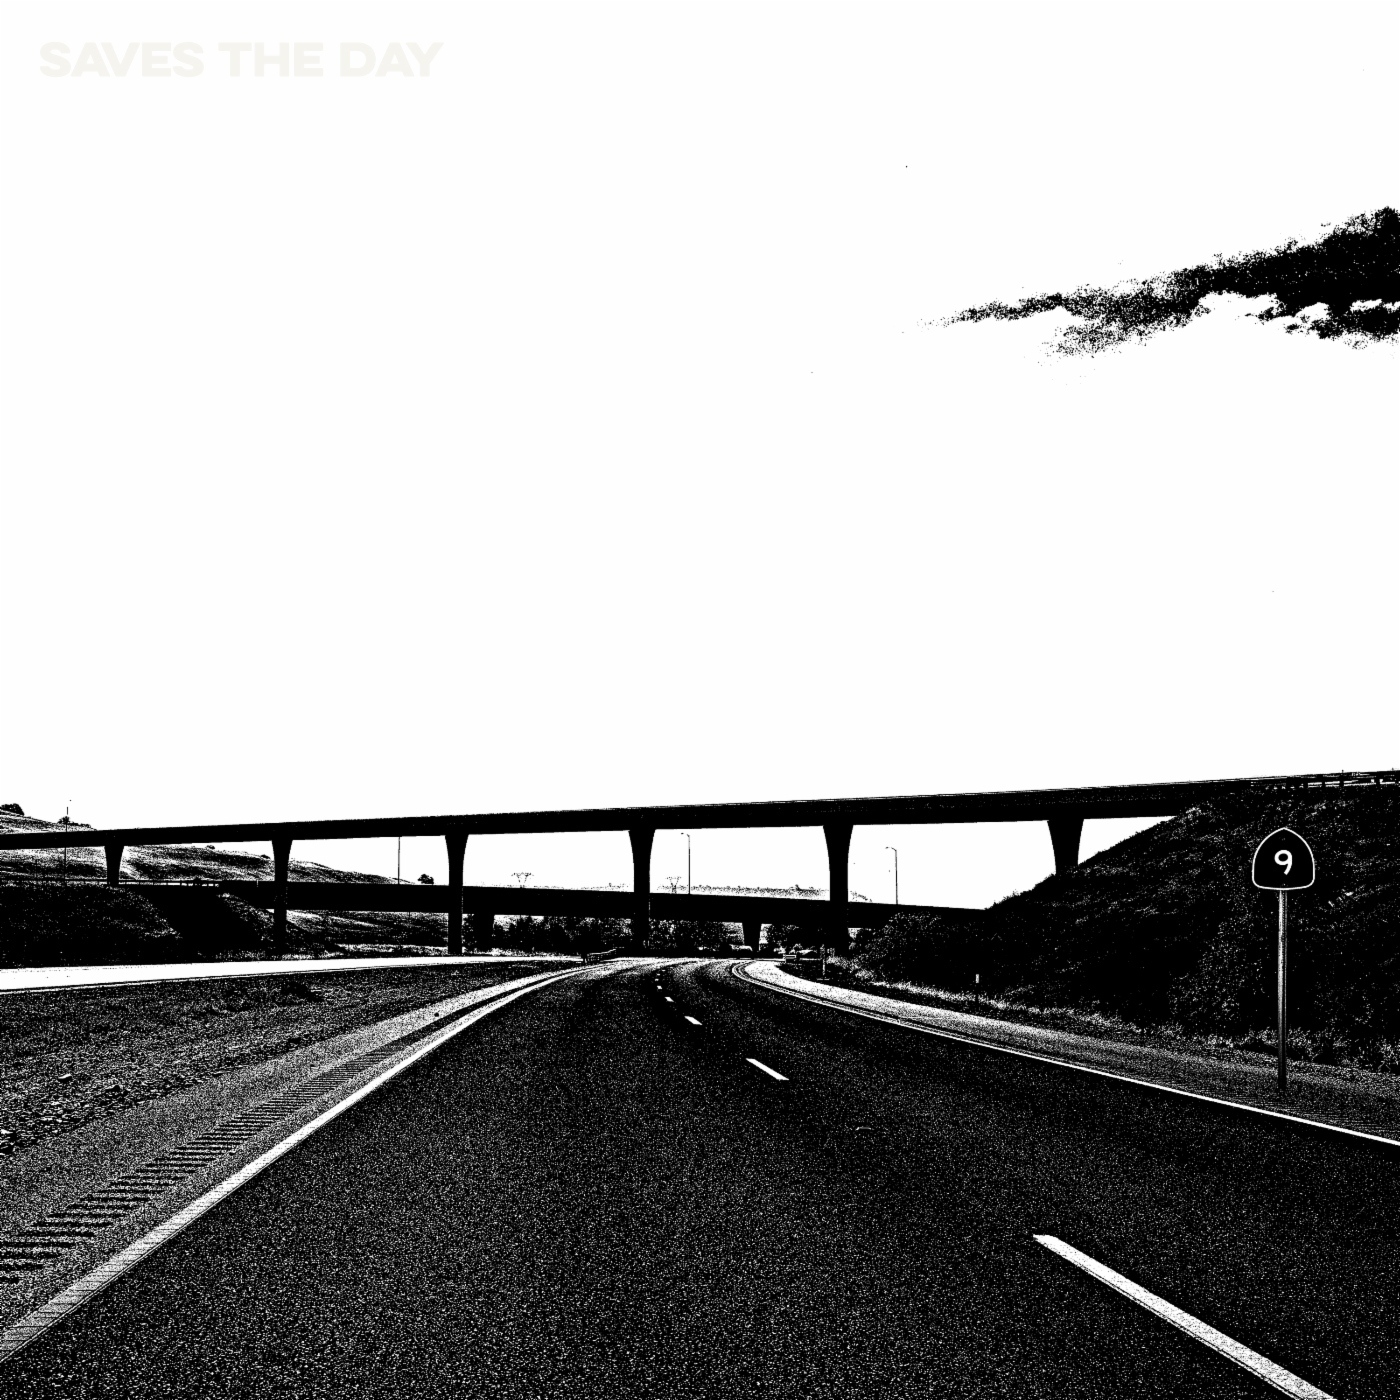 Saves The Day - 9 (2018) Album Info